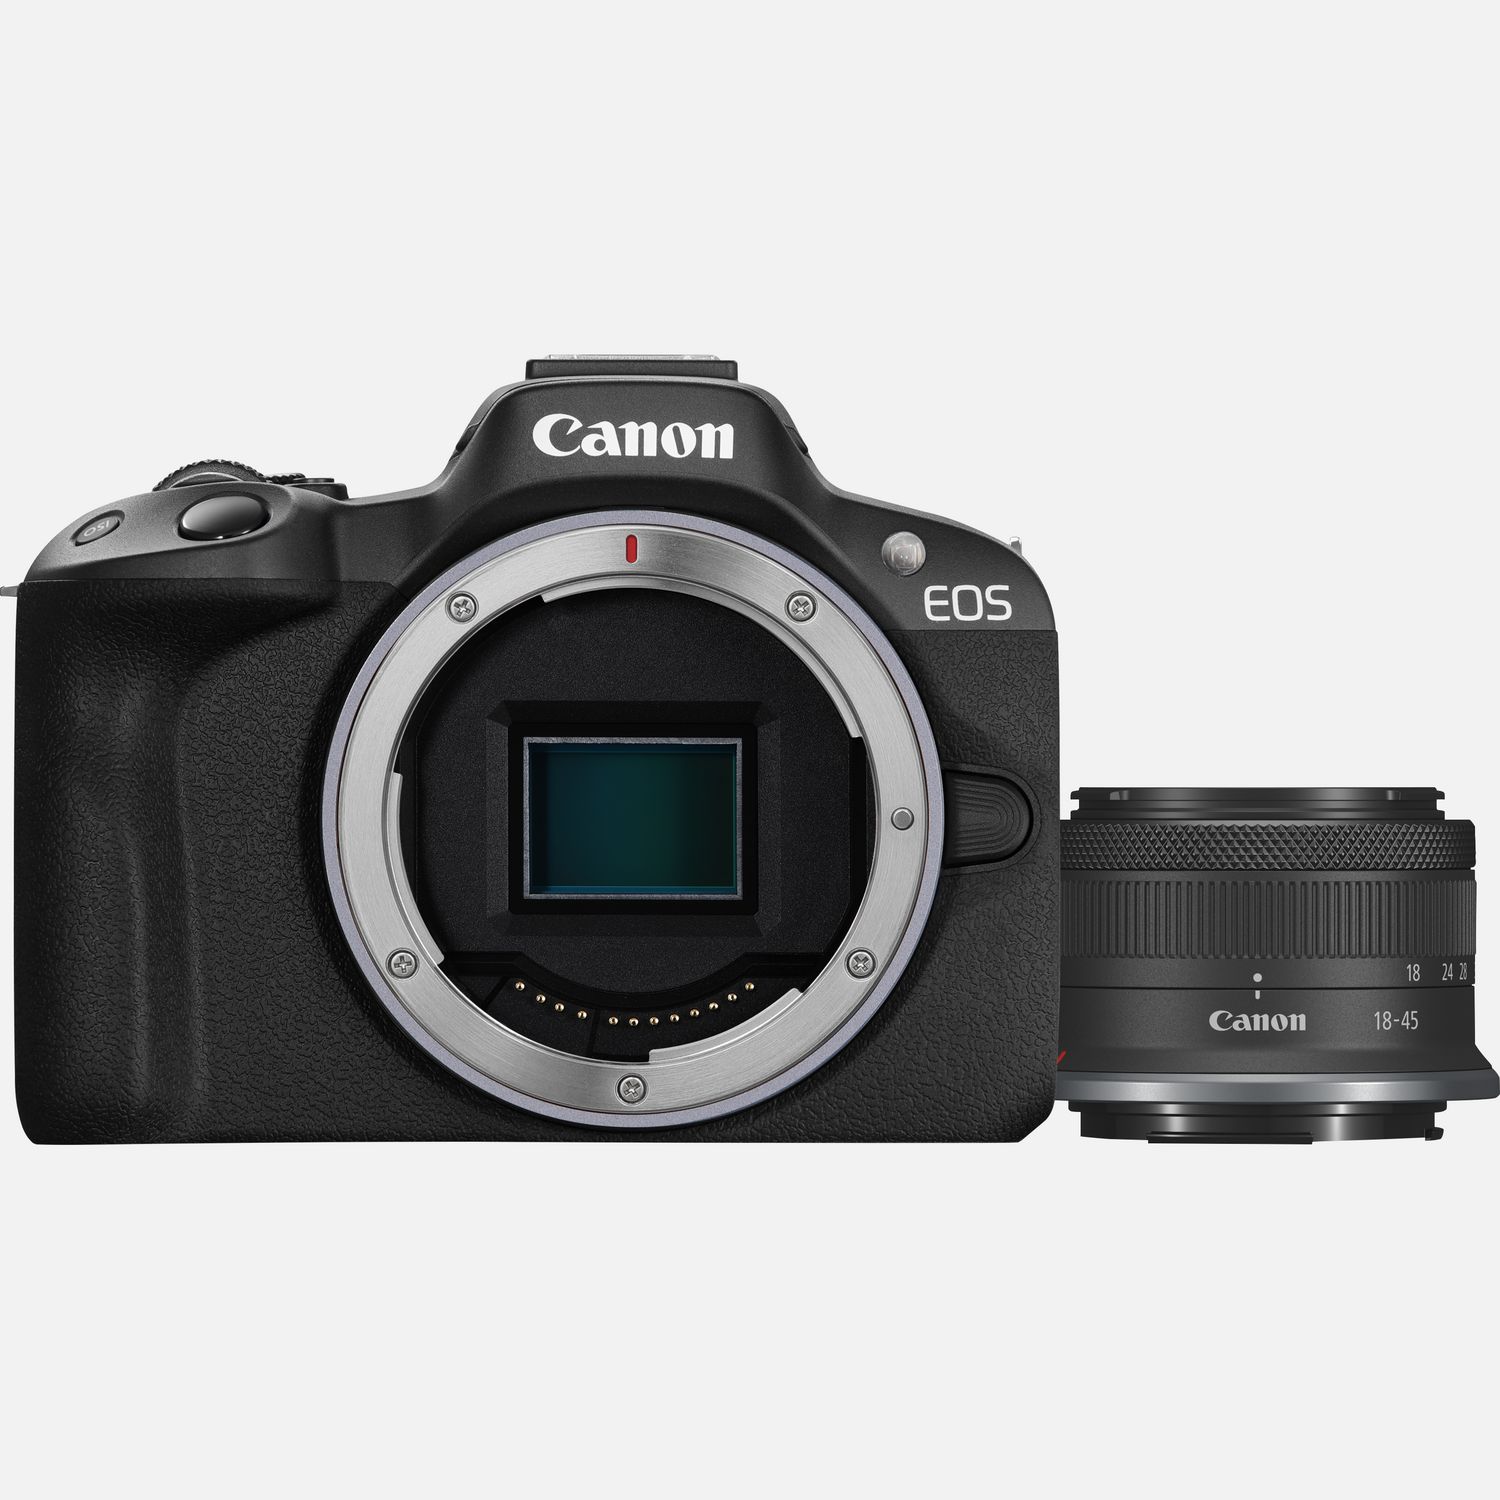  Canon EOS R50 Mirrorless Camera with 18-45mm Lens (Black)  (5811C012) + 64GB Memory Card + Bag + Charger + LPE17 Battery + Card Reader  + Memory Wallet + Cleaning Kit (Renewed) : Electronics